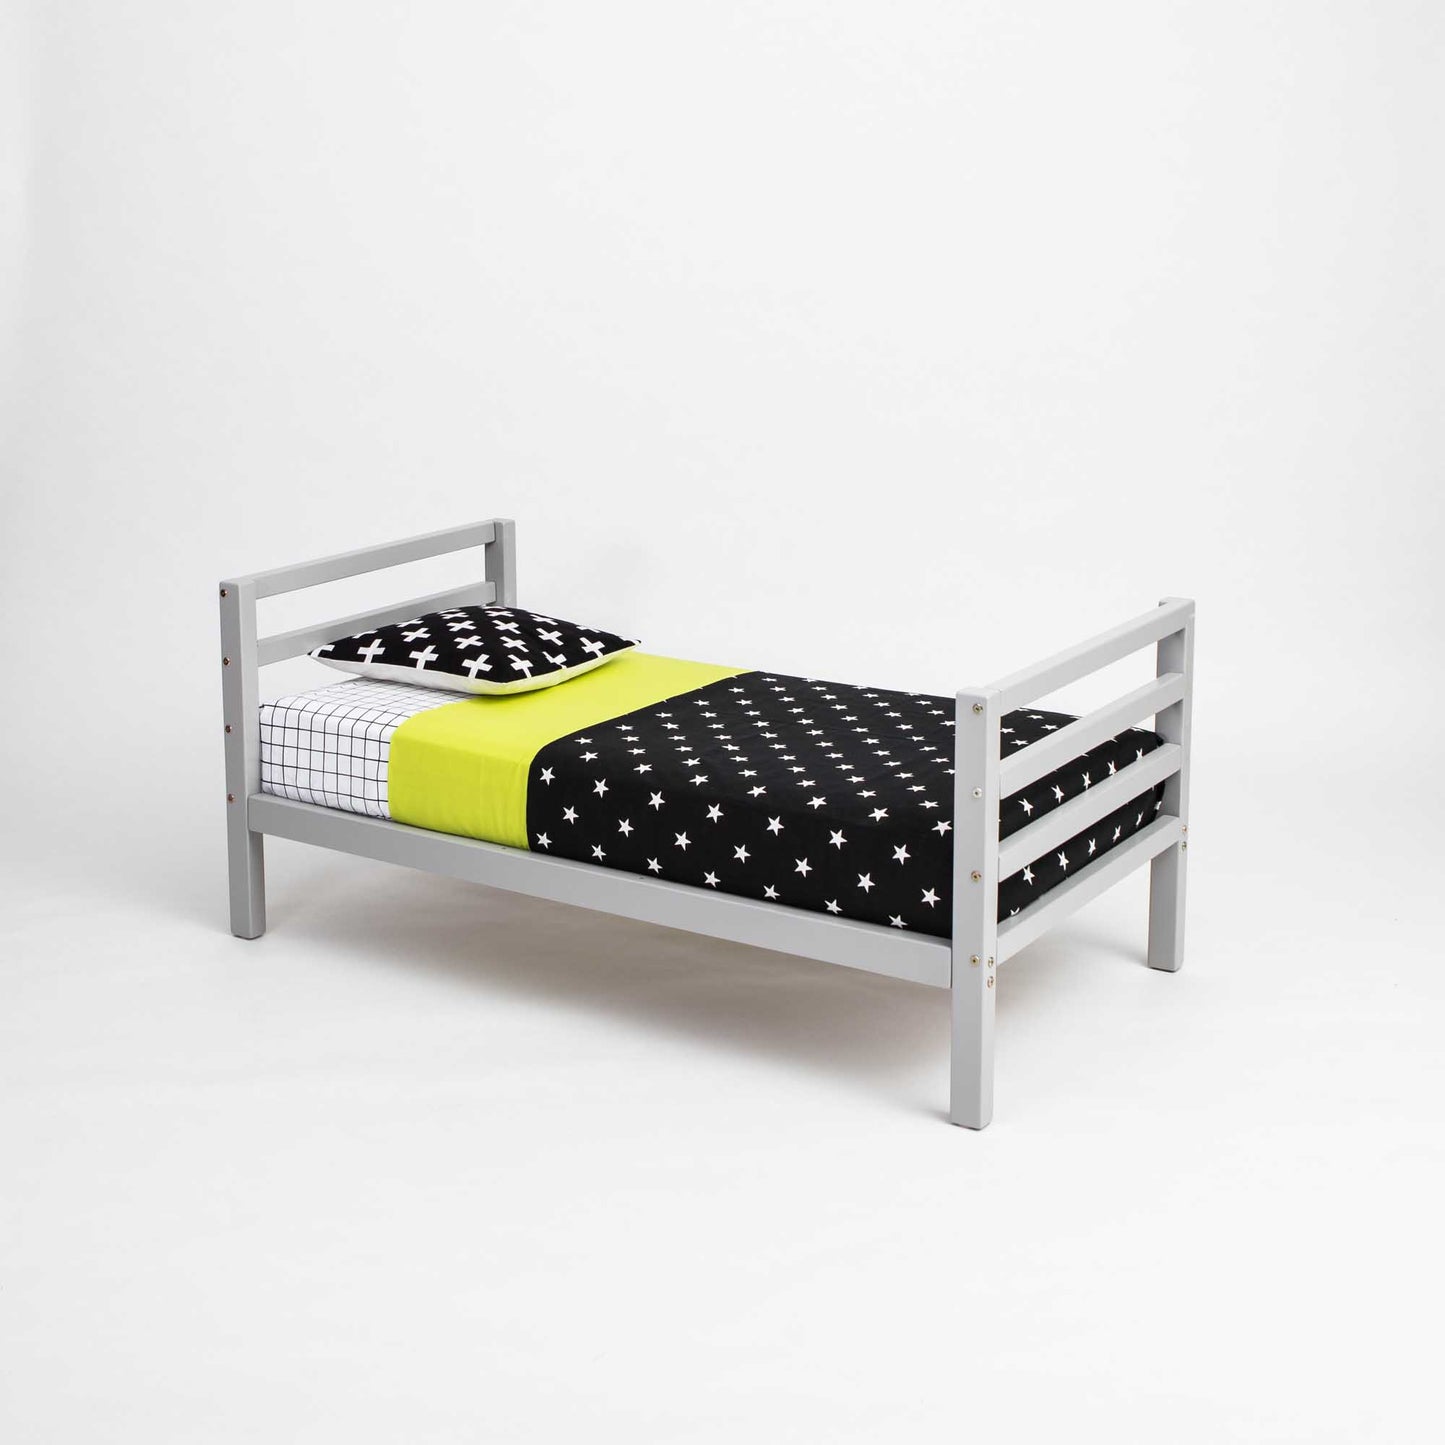 A long-lasting 2-in-1 kids' bed with polka dot sheets and a grey frame from Sweet Home From Wood that grows with the child.